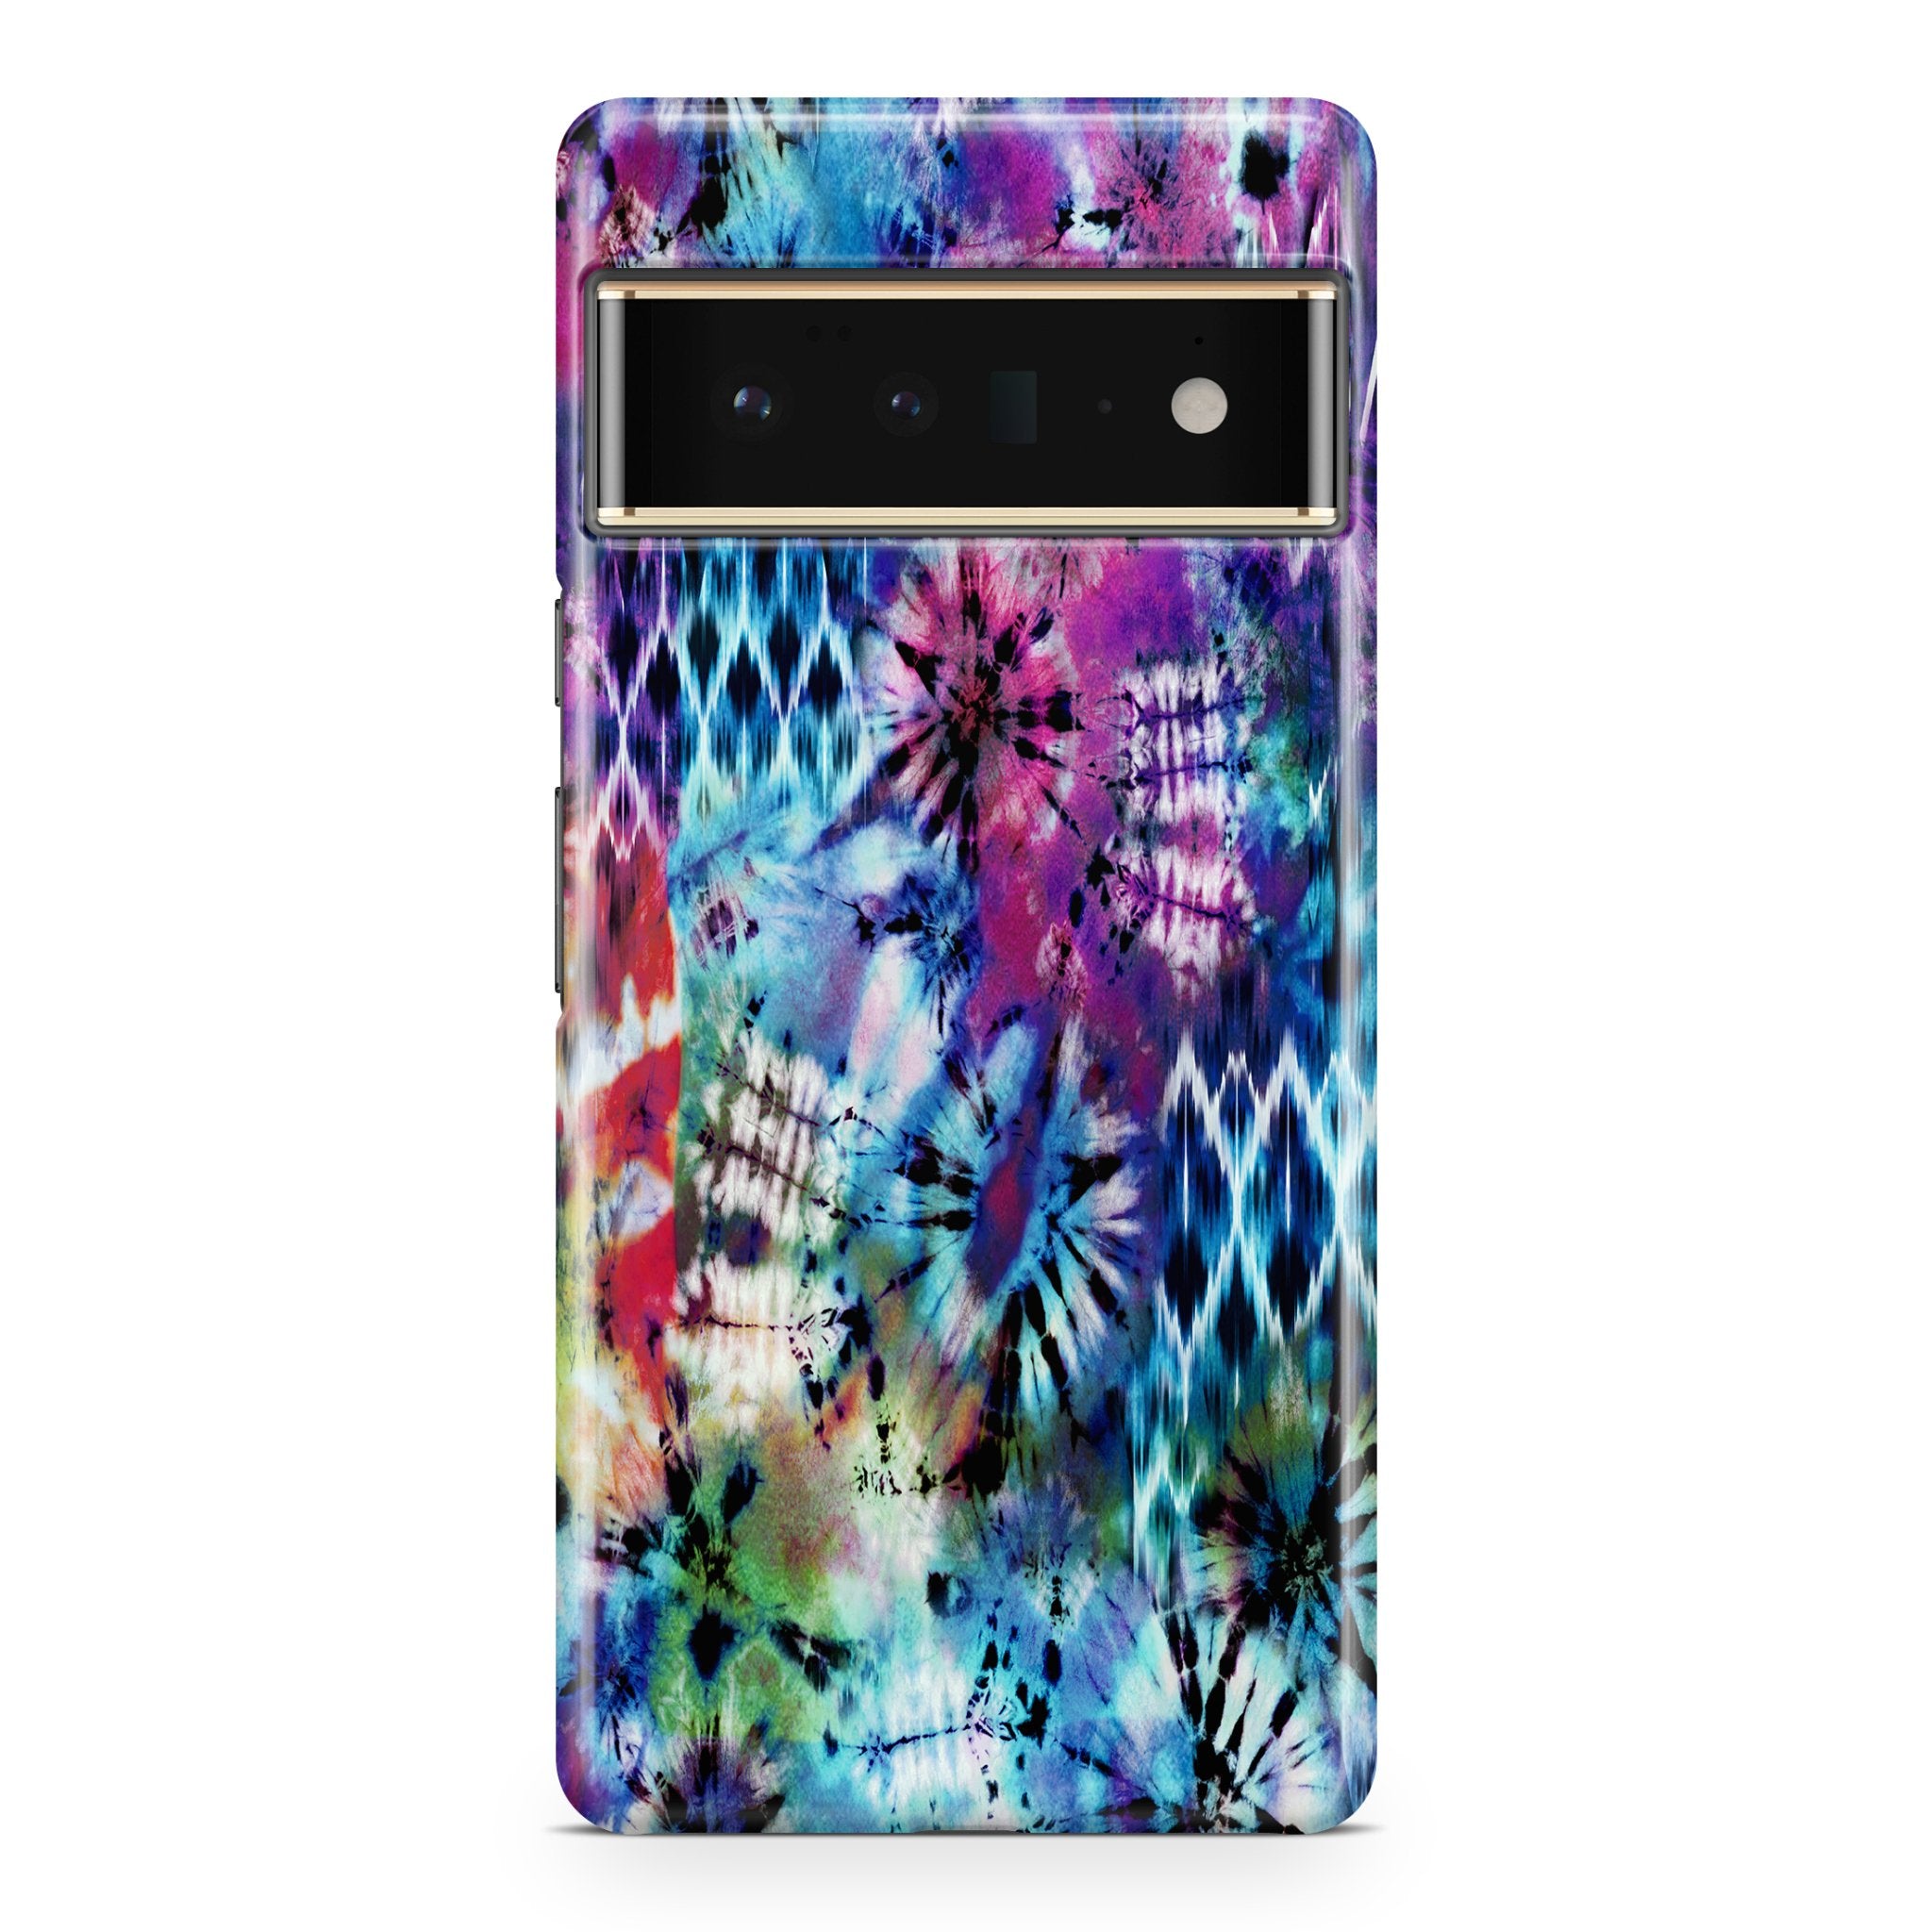 Chaos Tie Dye - Google phone case designs by CaseSwagger